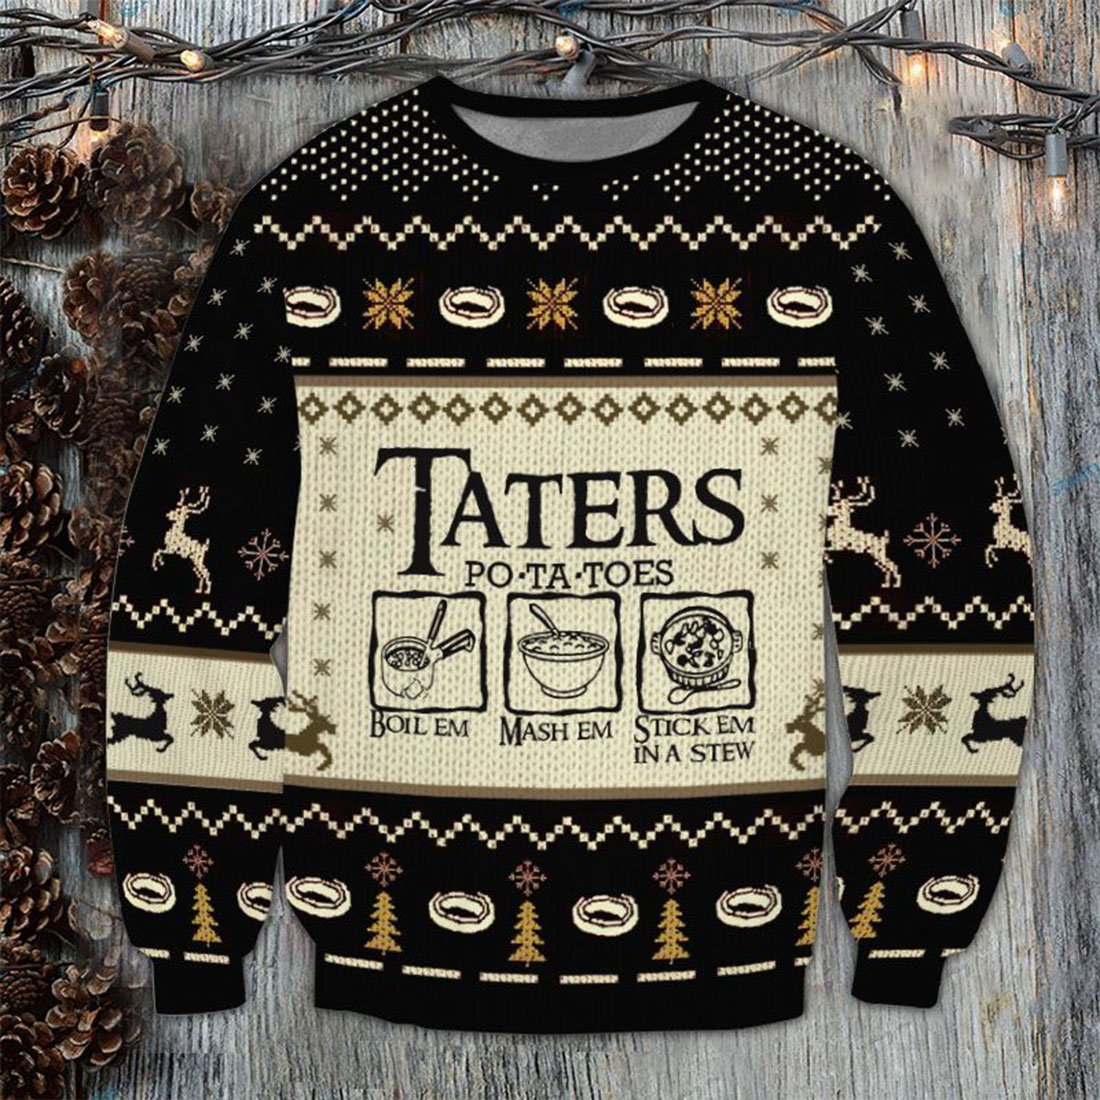 The Lord of the Rings Taters Potatoes Boil em Ugly Sweater